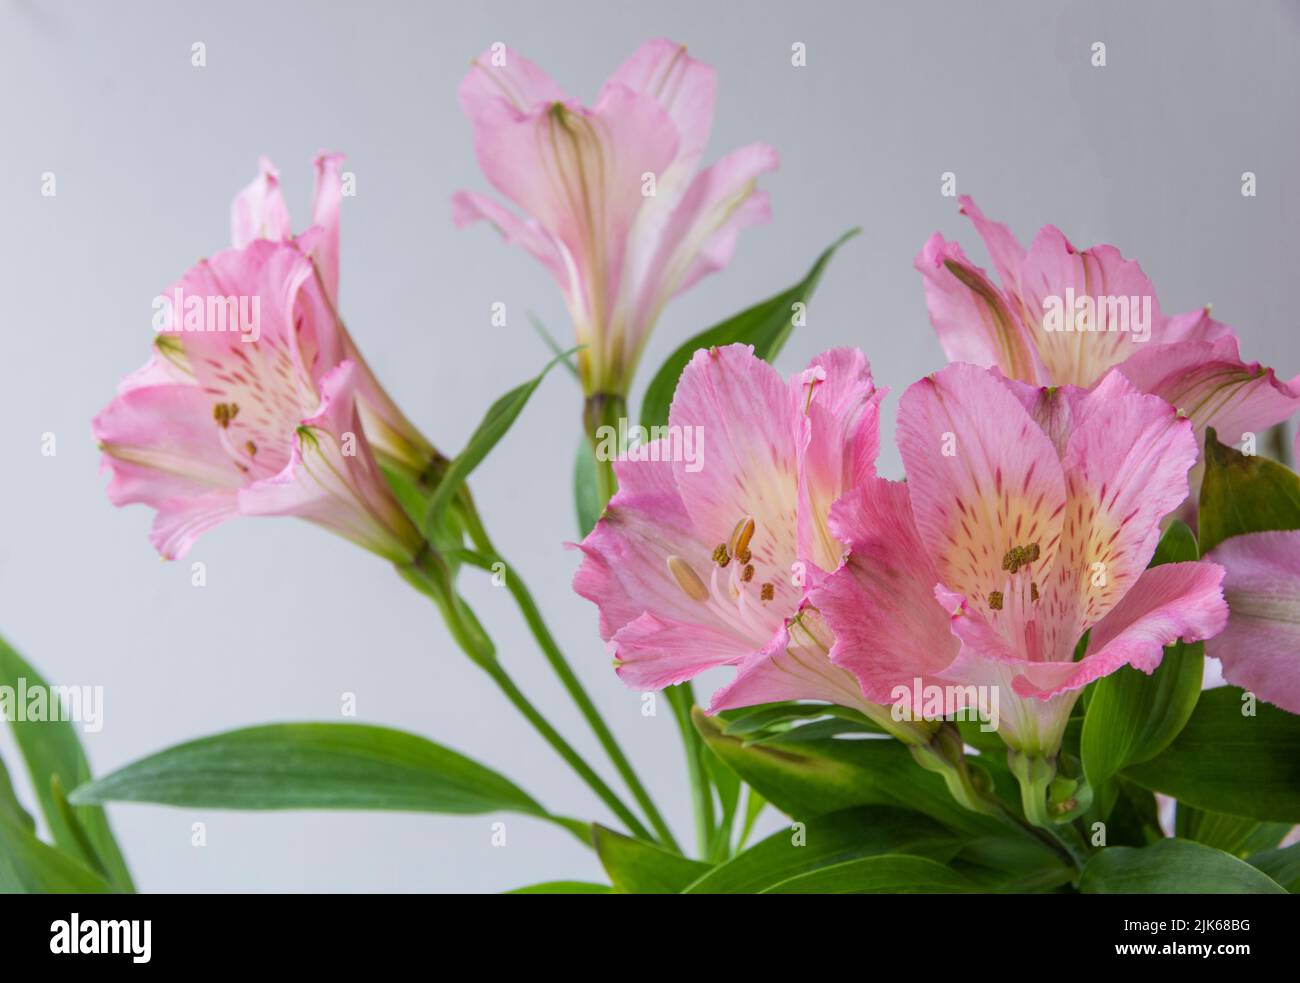 A bouquet of Pink Alstroemeria flowers in full flower with a white background, landscape orientation Stock Photo